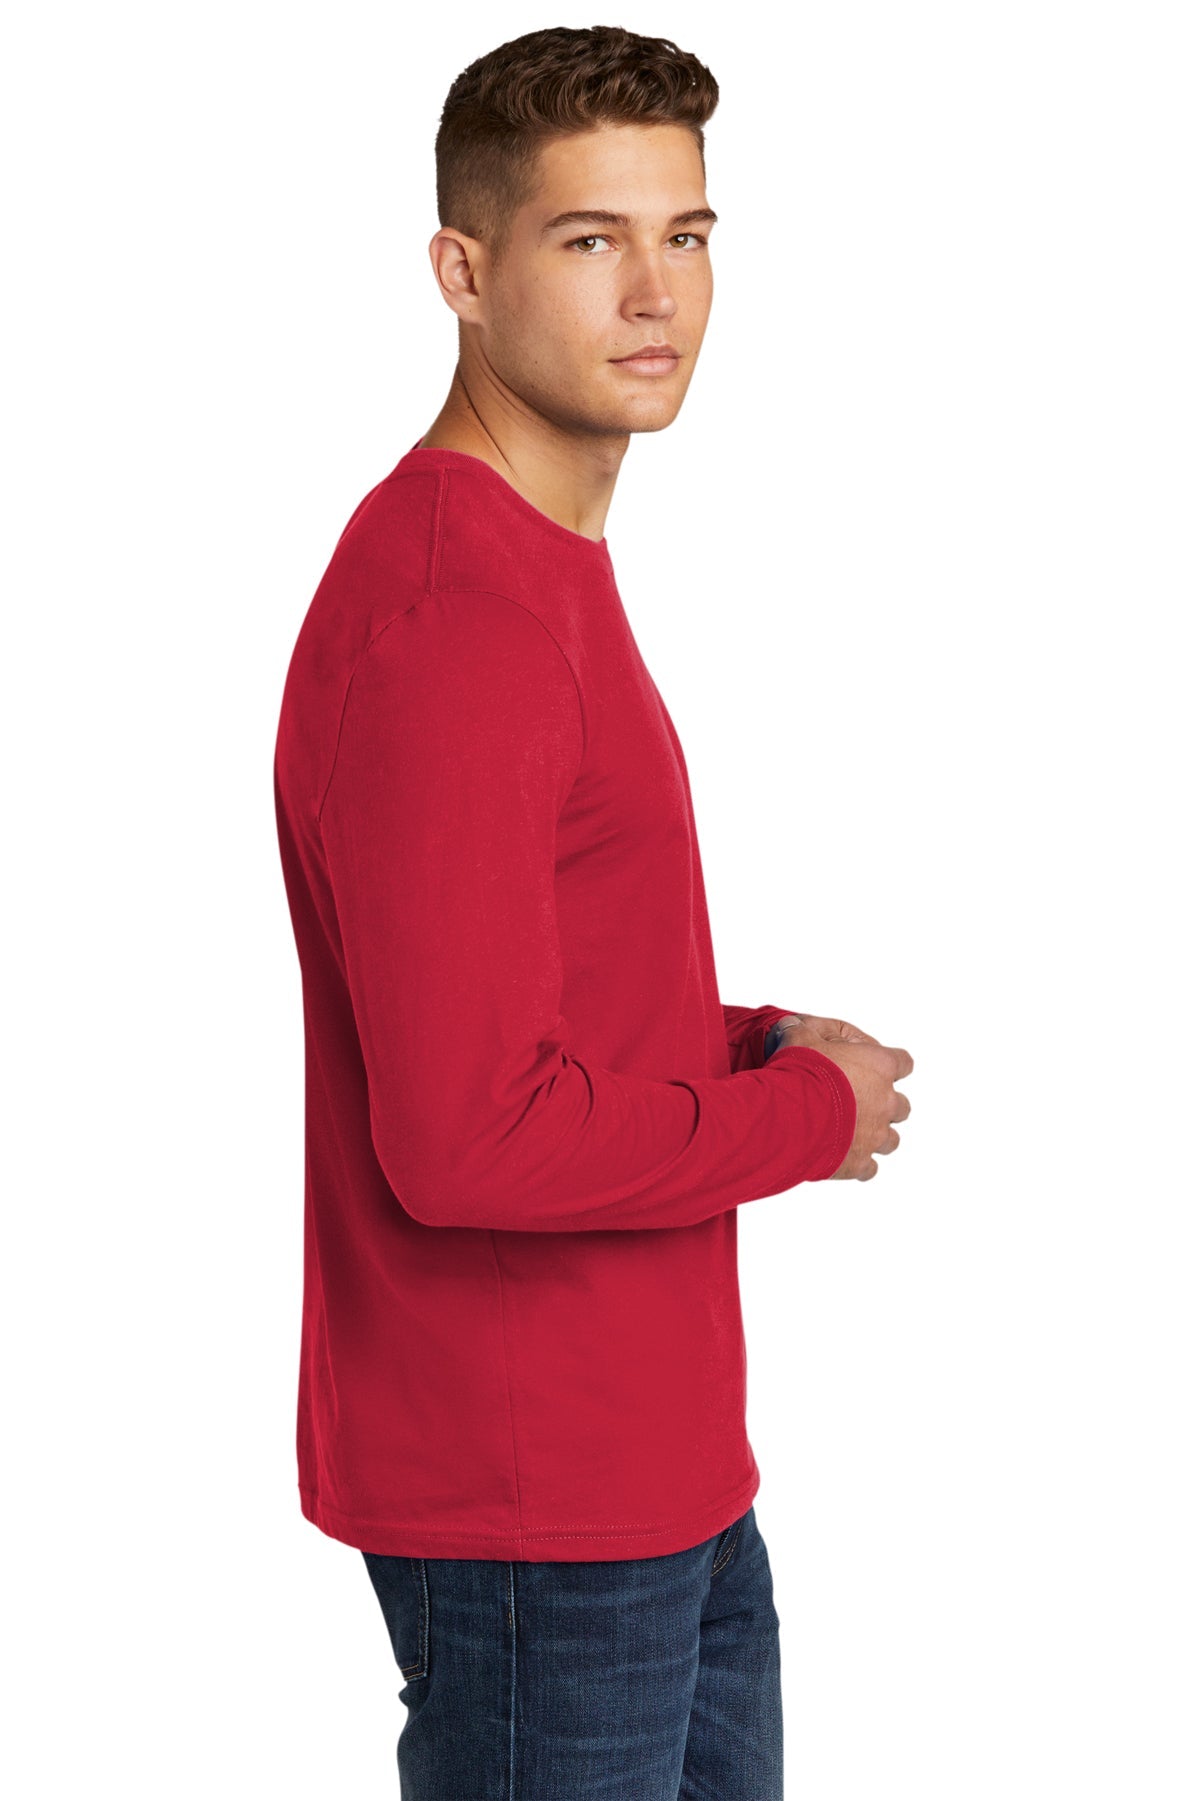 Next Level Cotton Long Sleeve Tee NL3601 Red